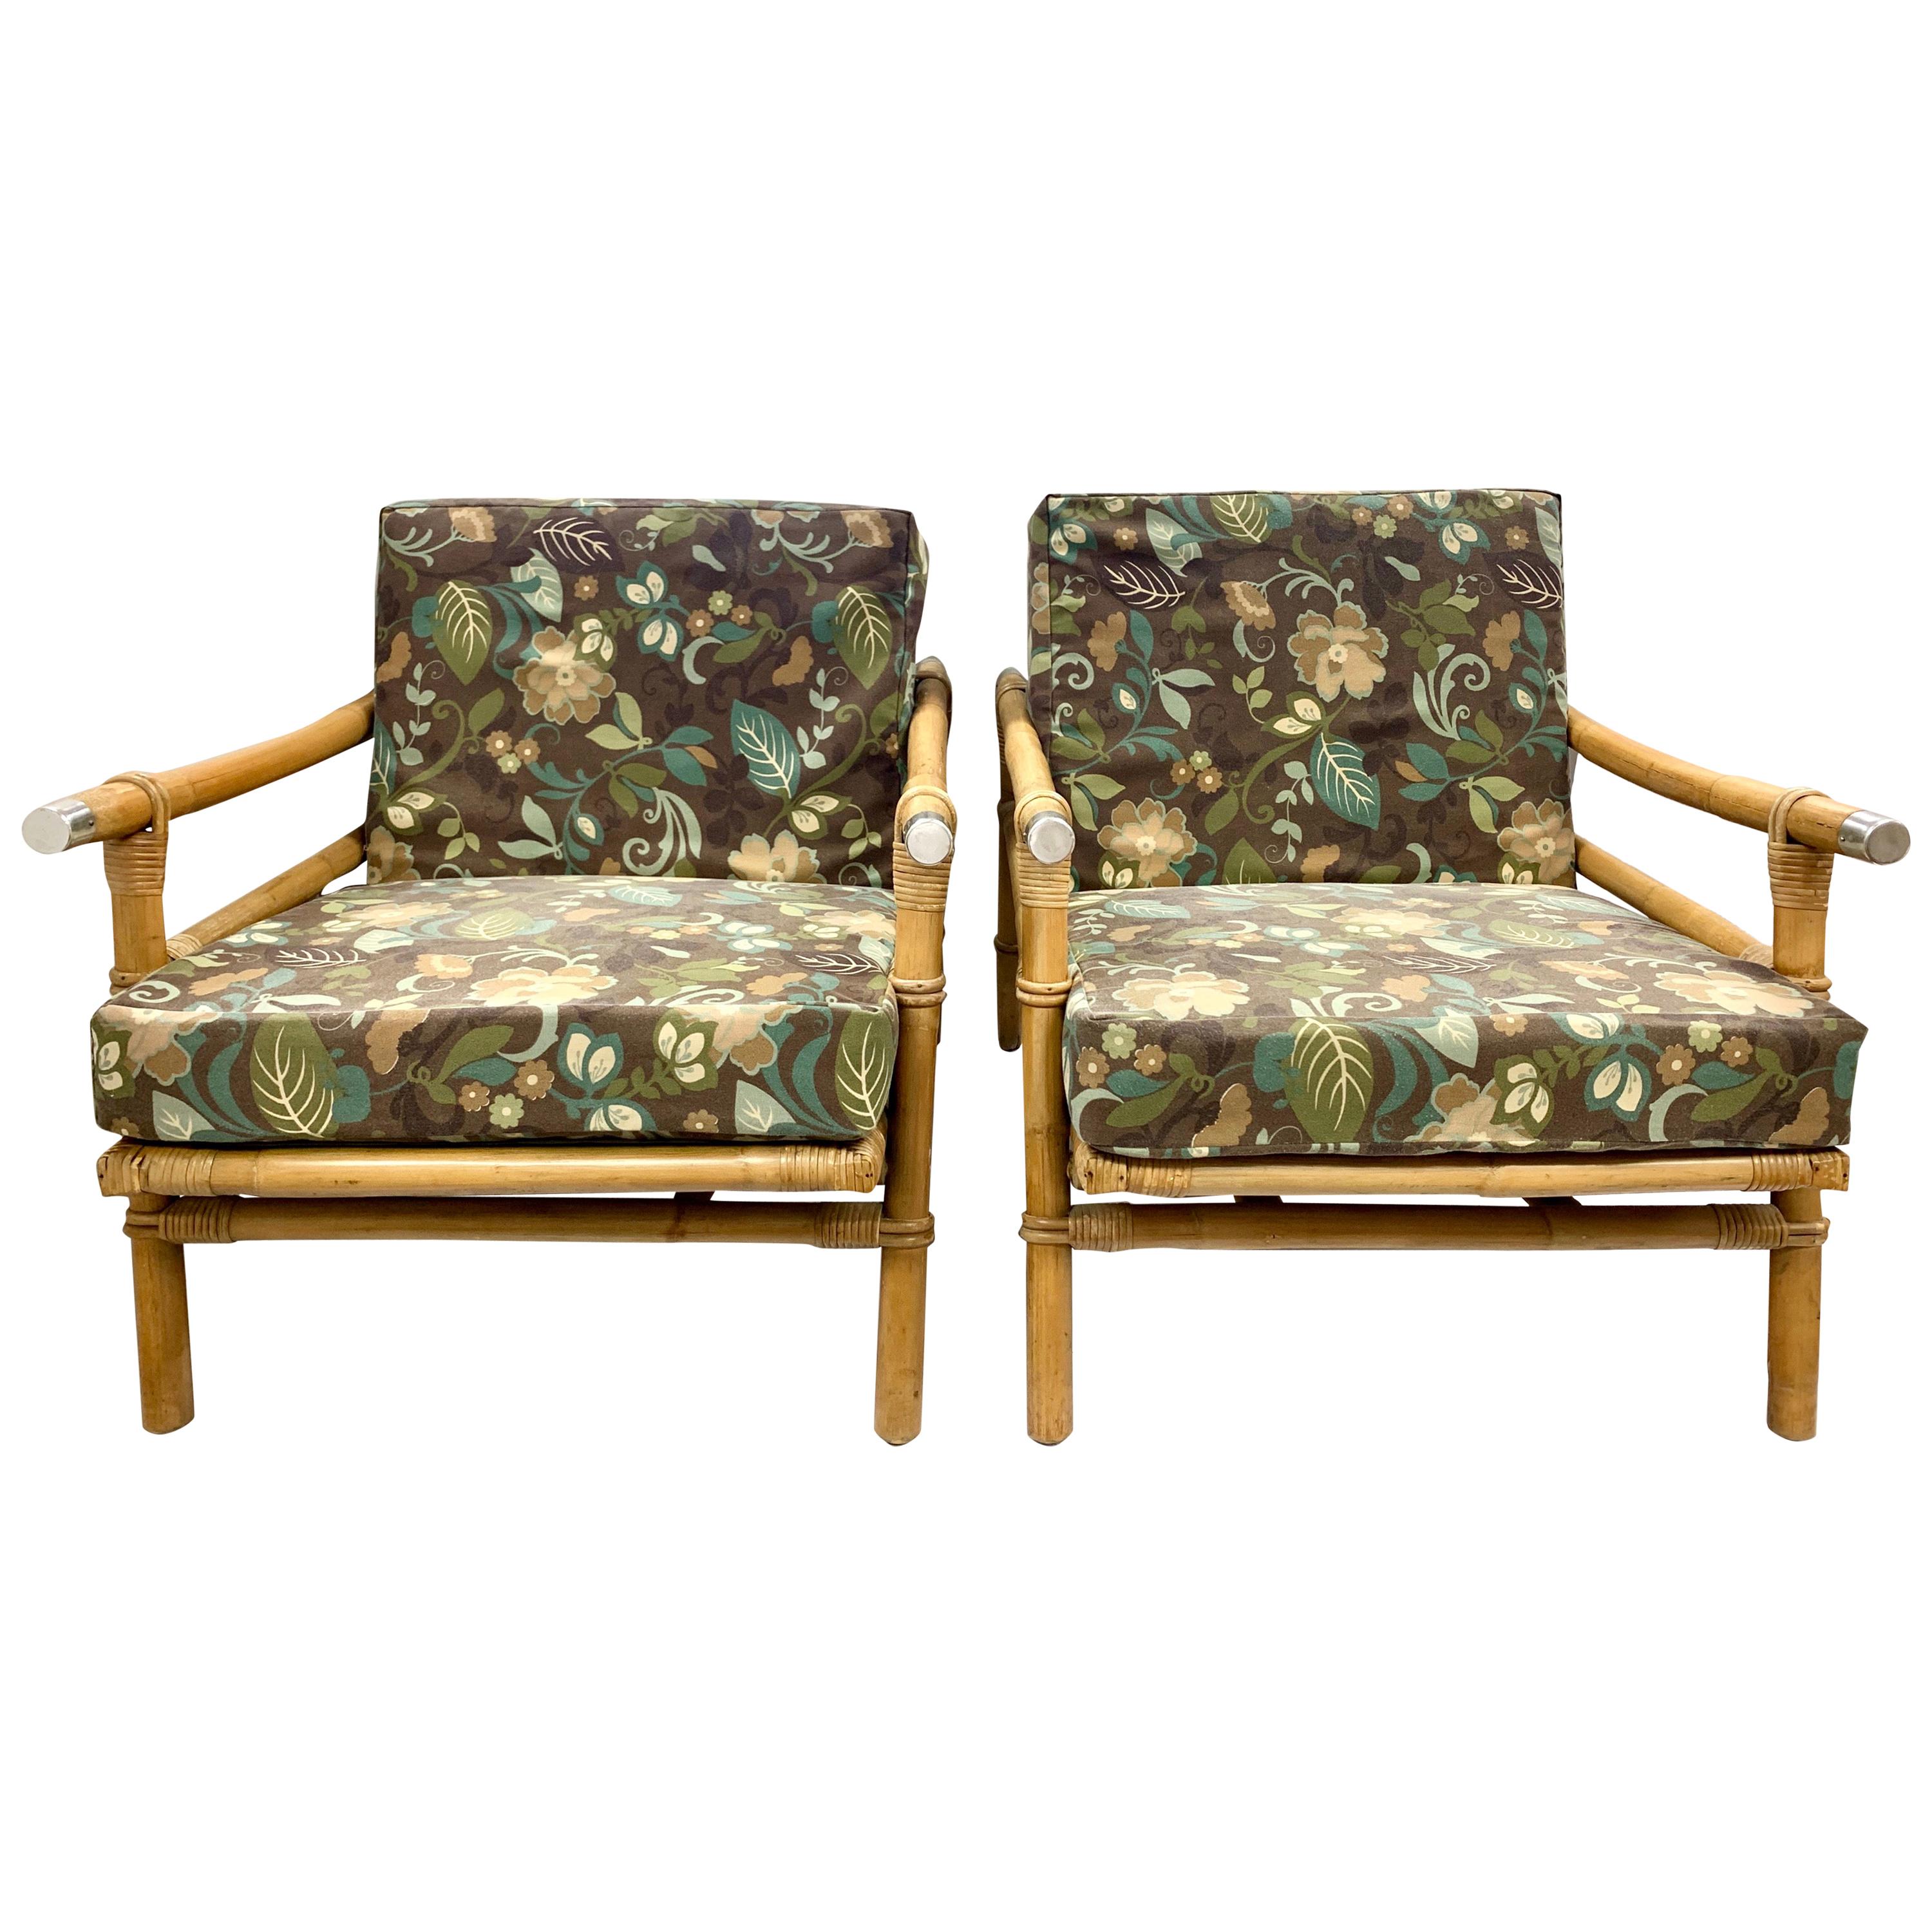 Pair of Rattan Bamboo Ficks Reed John Wisner Campaign Loungers Armchairs, 1954